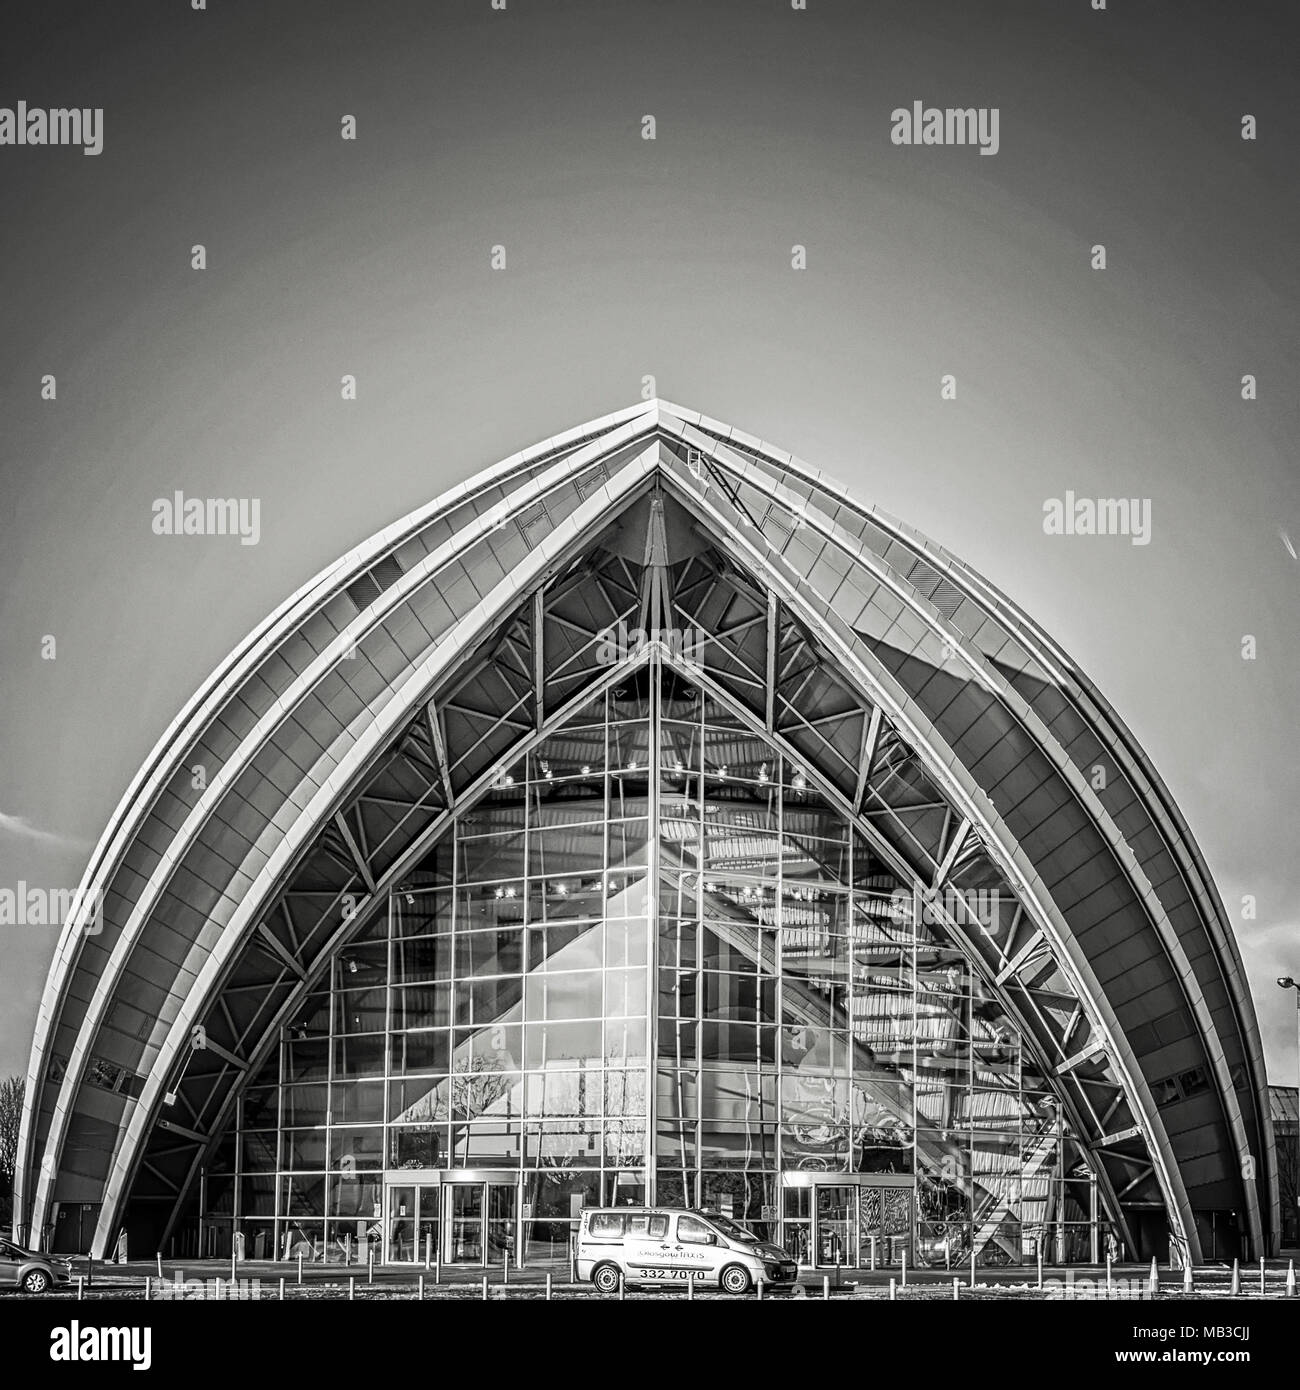 GLASGOW, SCOTLAND - JANUARY 17, 2018: A monochromatic view of the armadillo auditorium in Glasgow near to the river clyde. Stock Photo